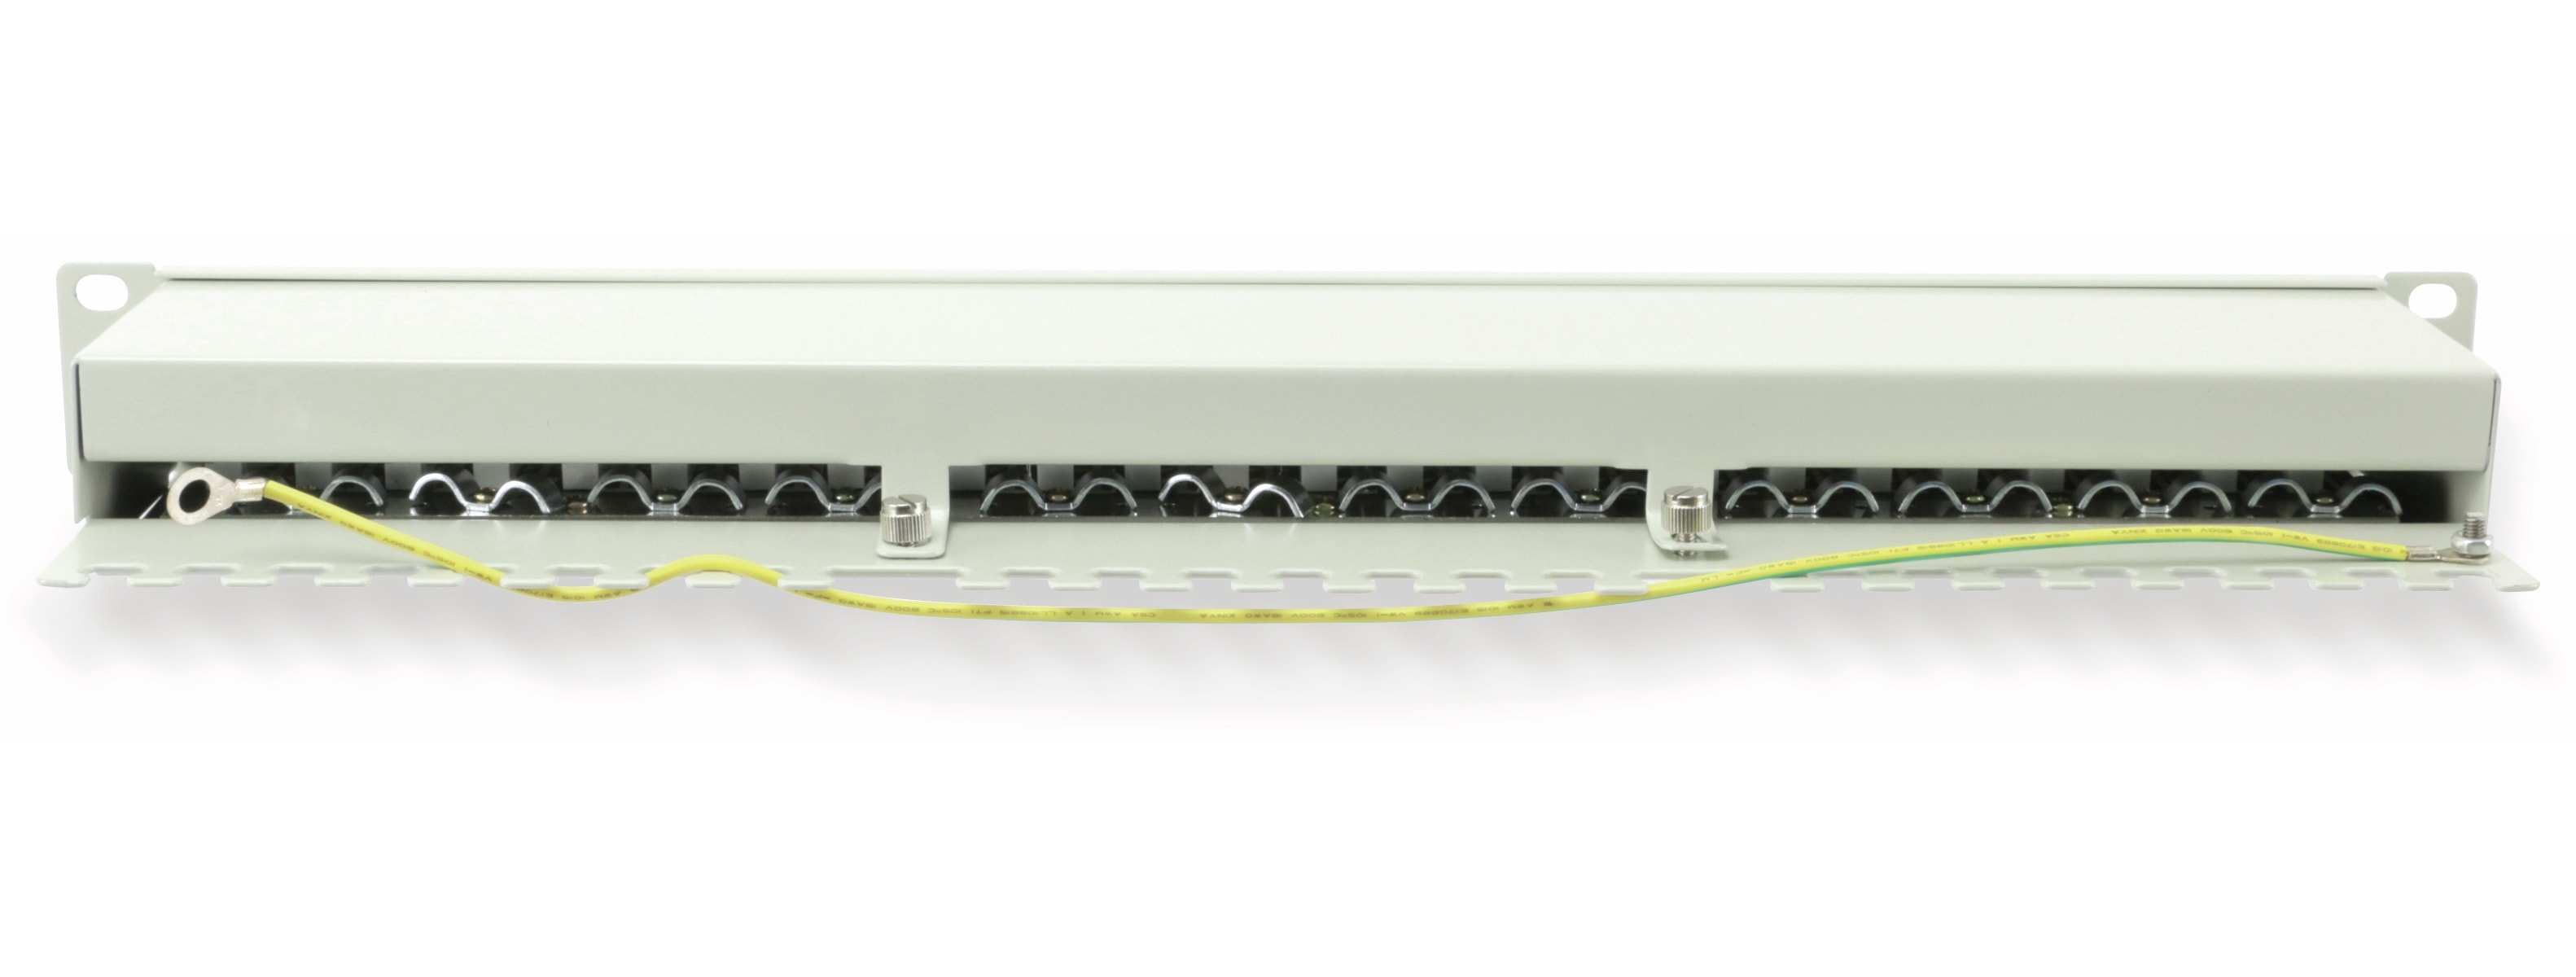 RED4POWER CAT.6a Patchpanel R4-N119G, 24-fach, 19", grau